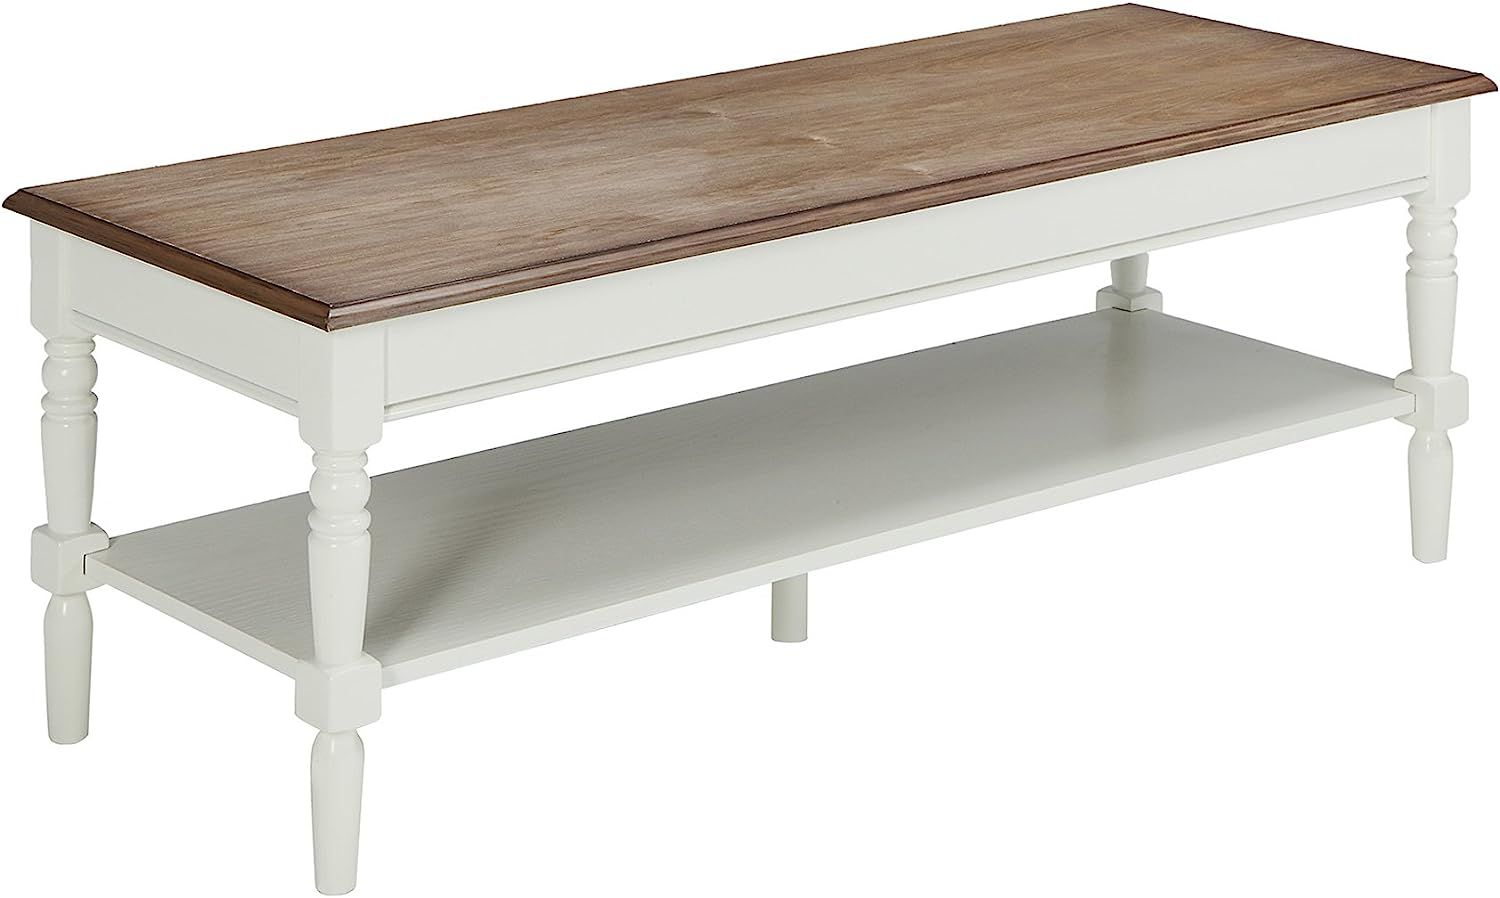 Convenience Concepts French Country Coffee Table, Driftwood / White | Amazon (US)